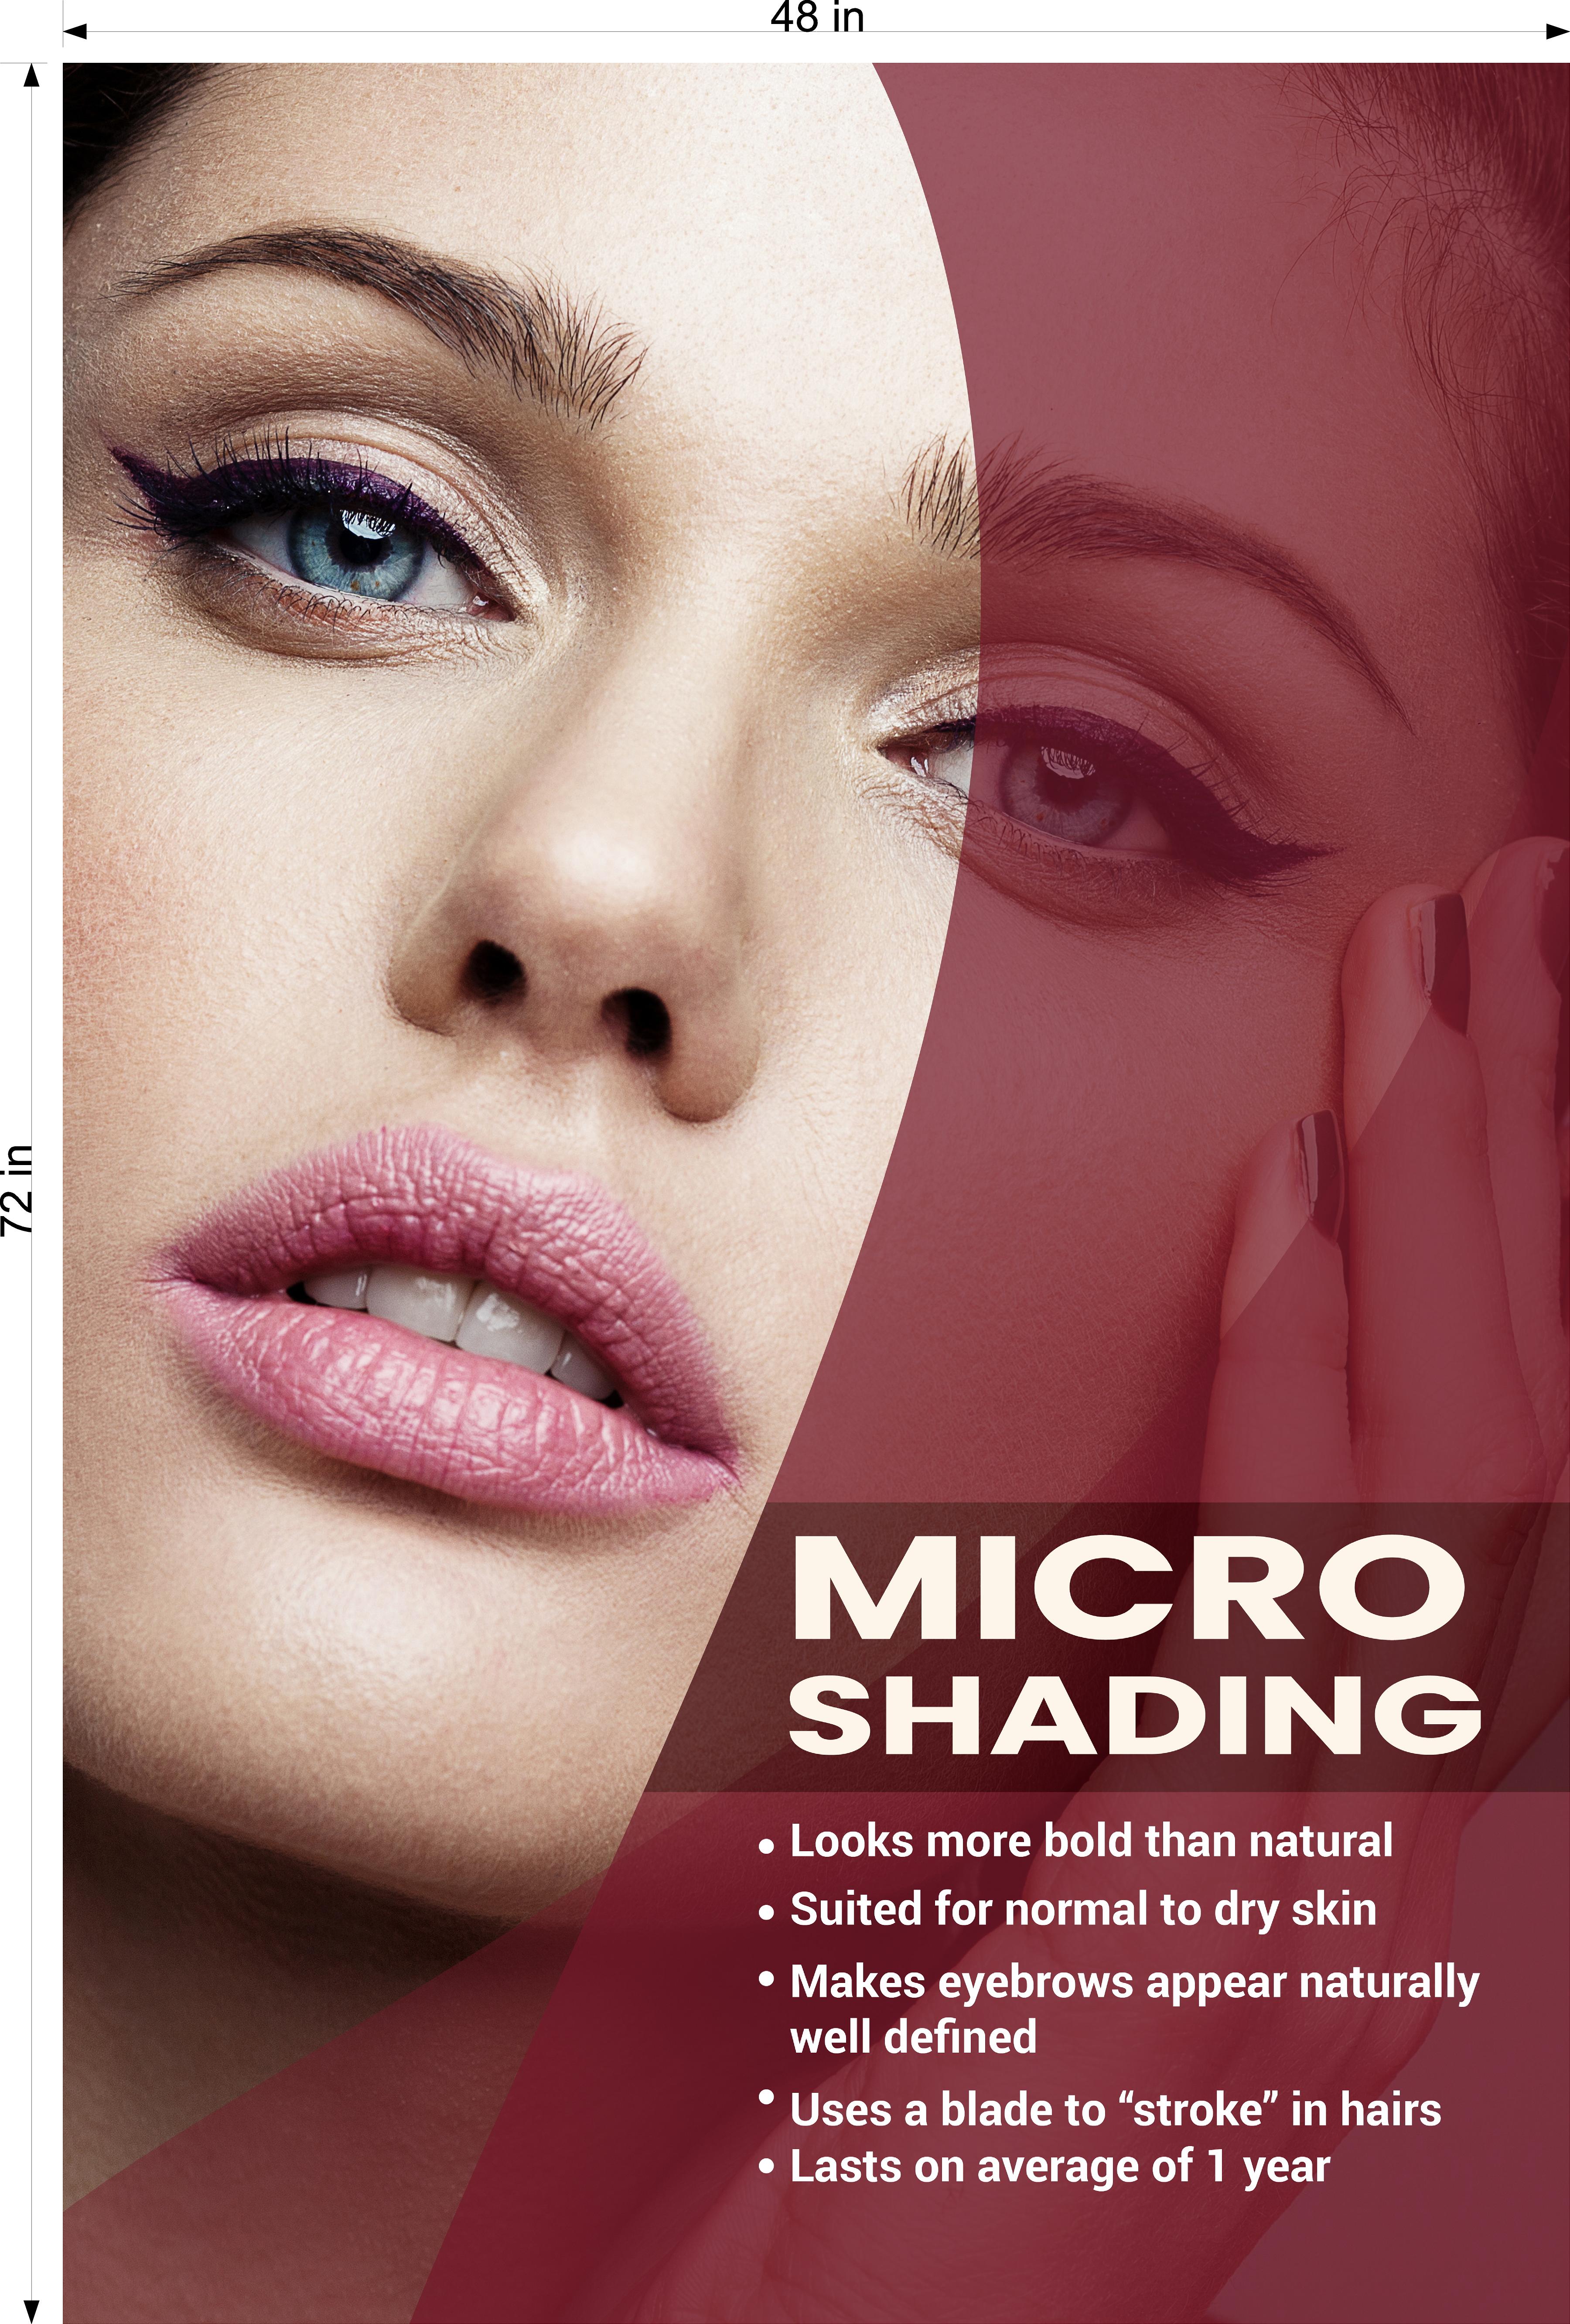 Microshading 06 Perforated Mesh One Way Vision See-Through Window Vinyl Salon Services Makeup Vertical